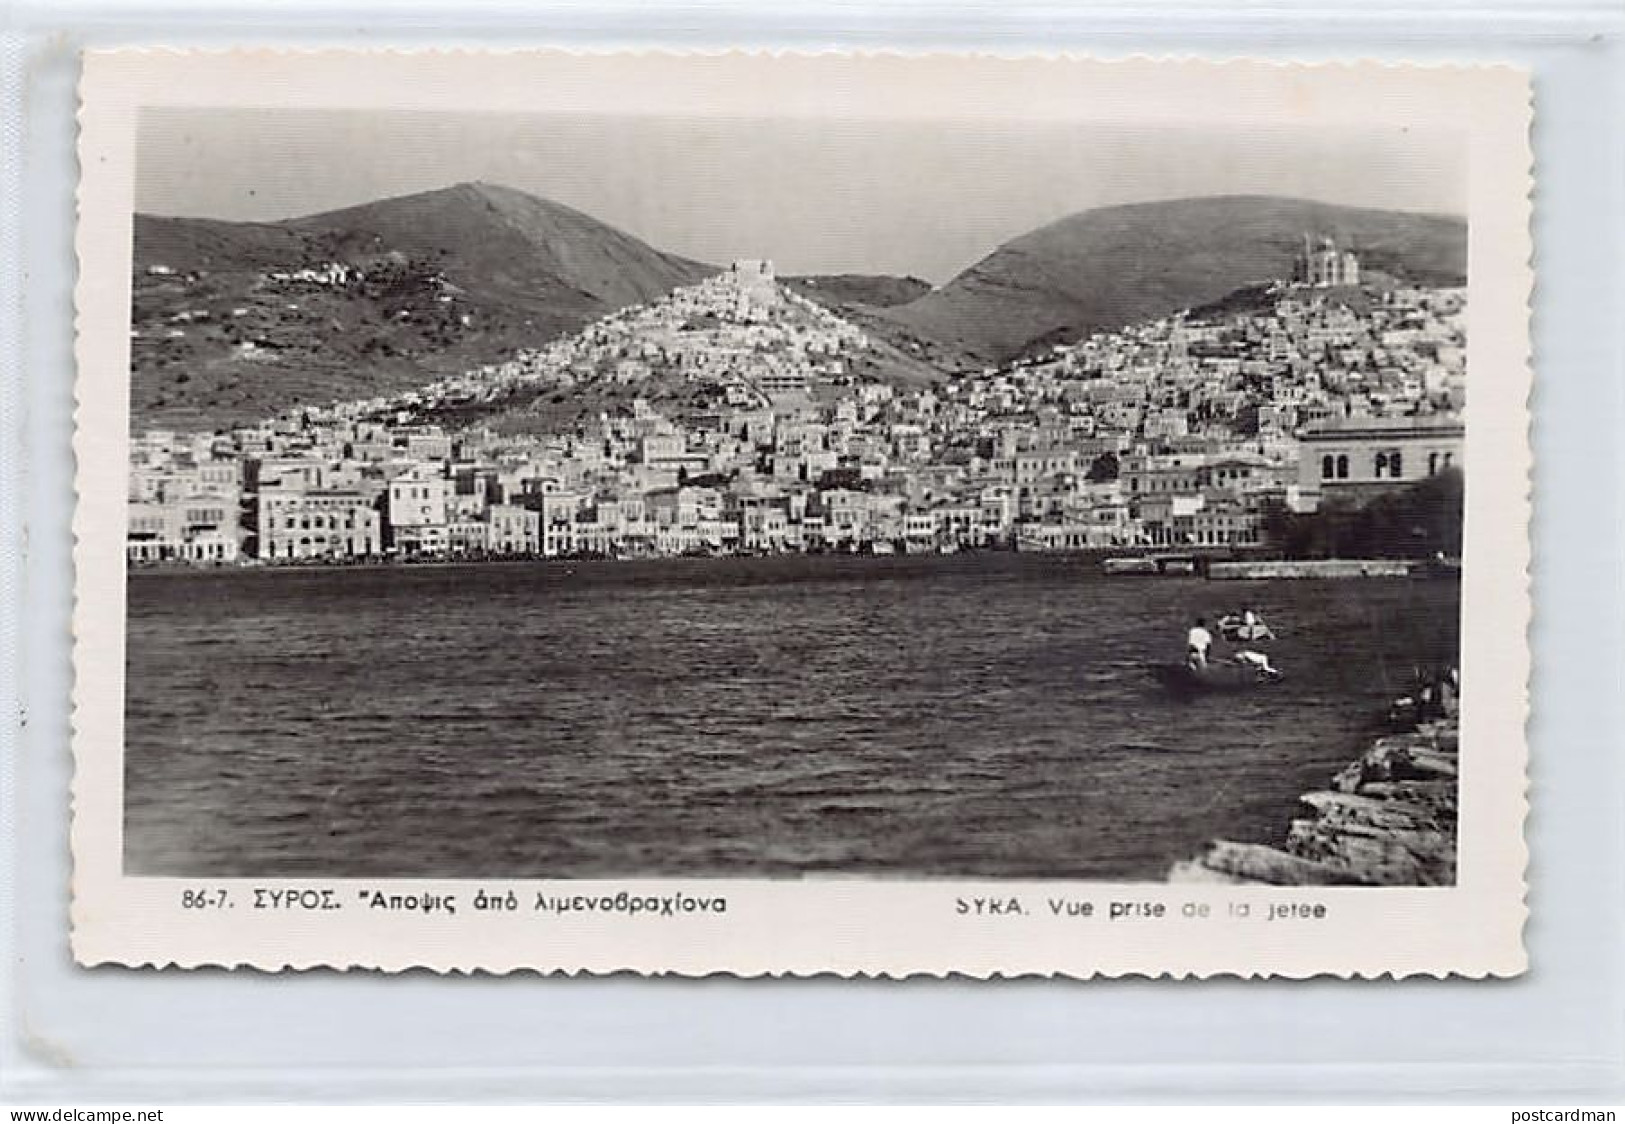 Greece - SYROS Syra - View From The Jetty - REAL PHOTO - Publ. E. Kaluta 867 - Greece